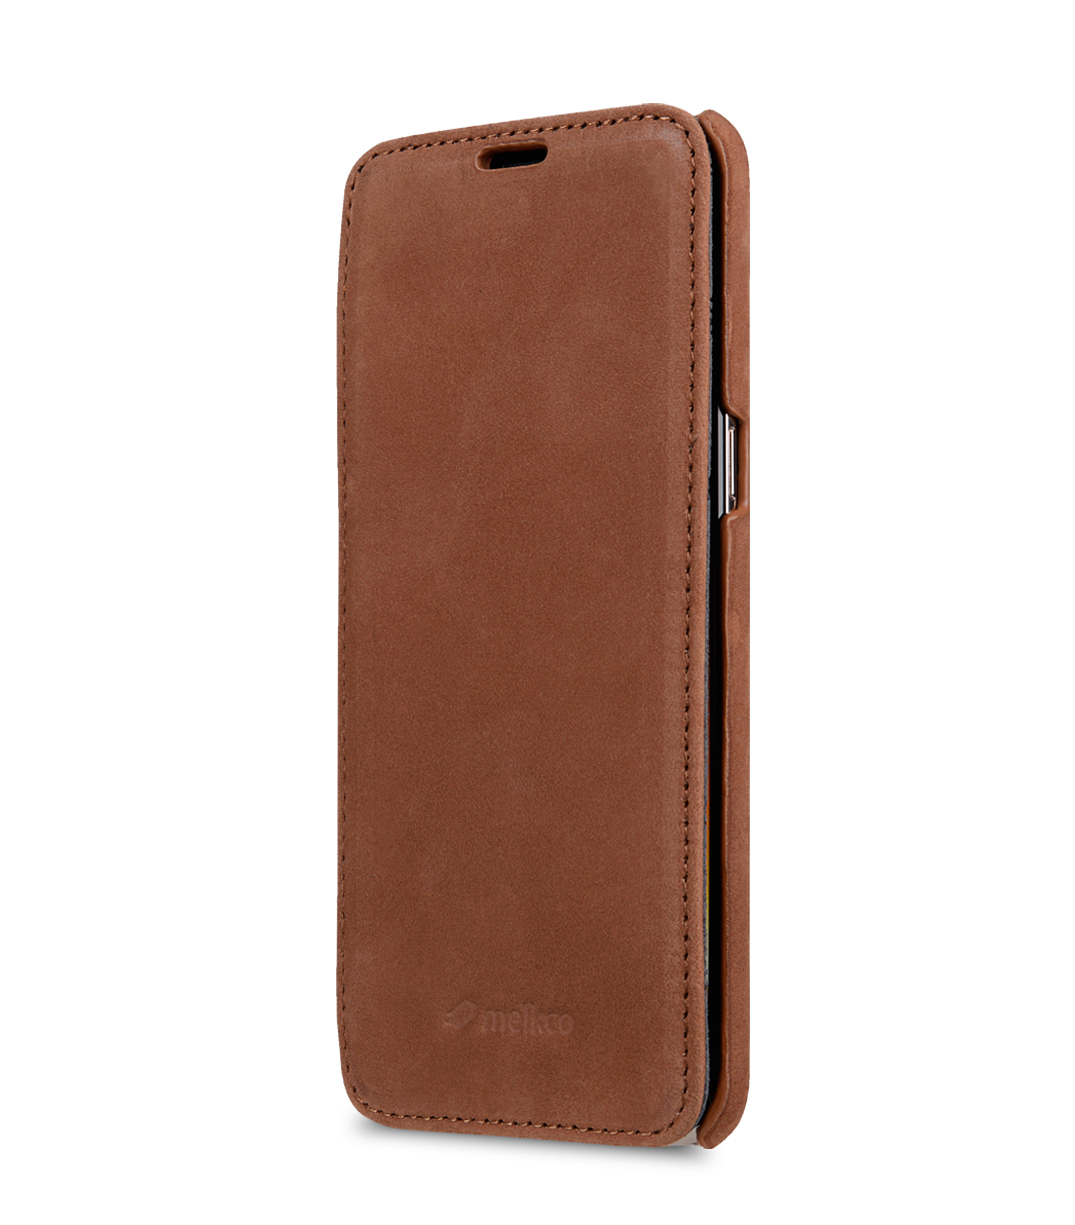 Melkco Premium Leather Case for Samsung Galaxy S8 Plus - Face Cover Book Type (Classic Vintage Brown)